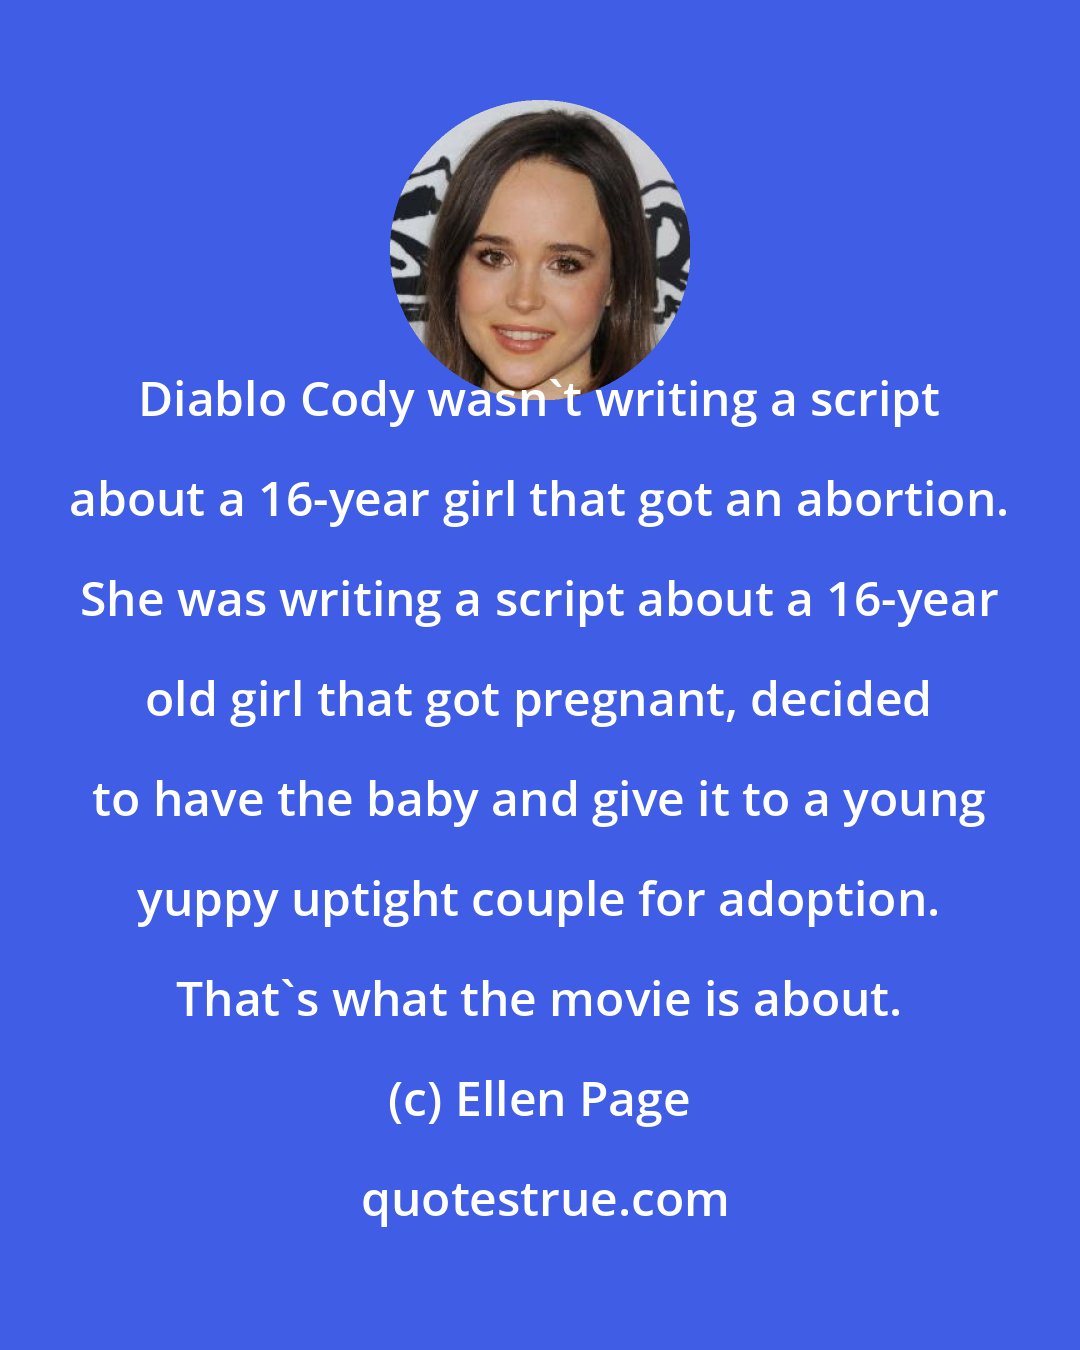 Ellen Page: Diablo Cody wasn't writing a script about a 16-year girl that got an abortion. She was writing a script about a 16-year old girl that got pregnant, decided to have the baby and give it to a young yuppy uptight couple for adoption. That's what the movie is about.